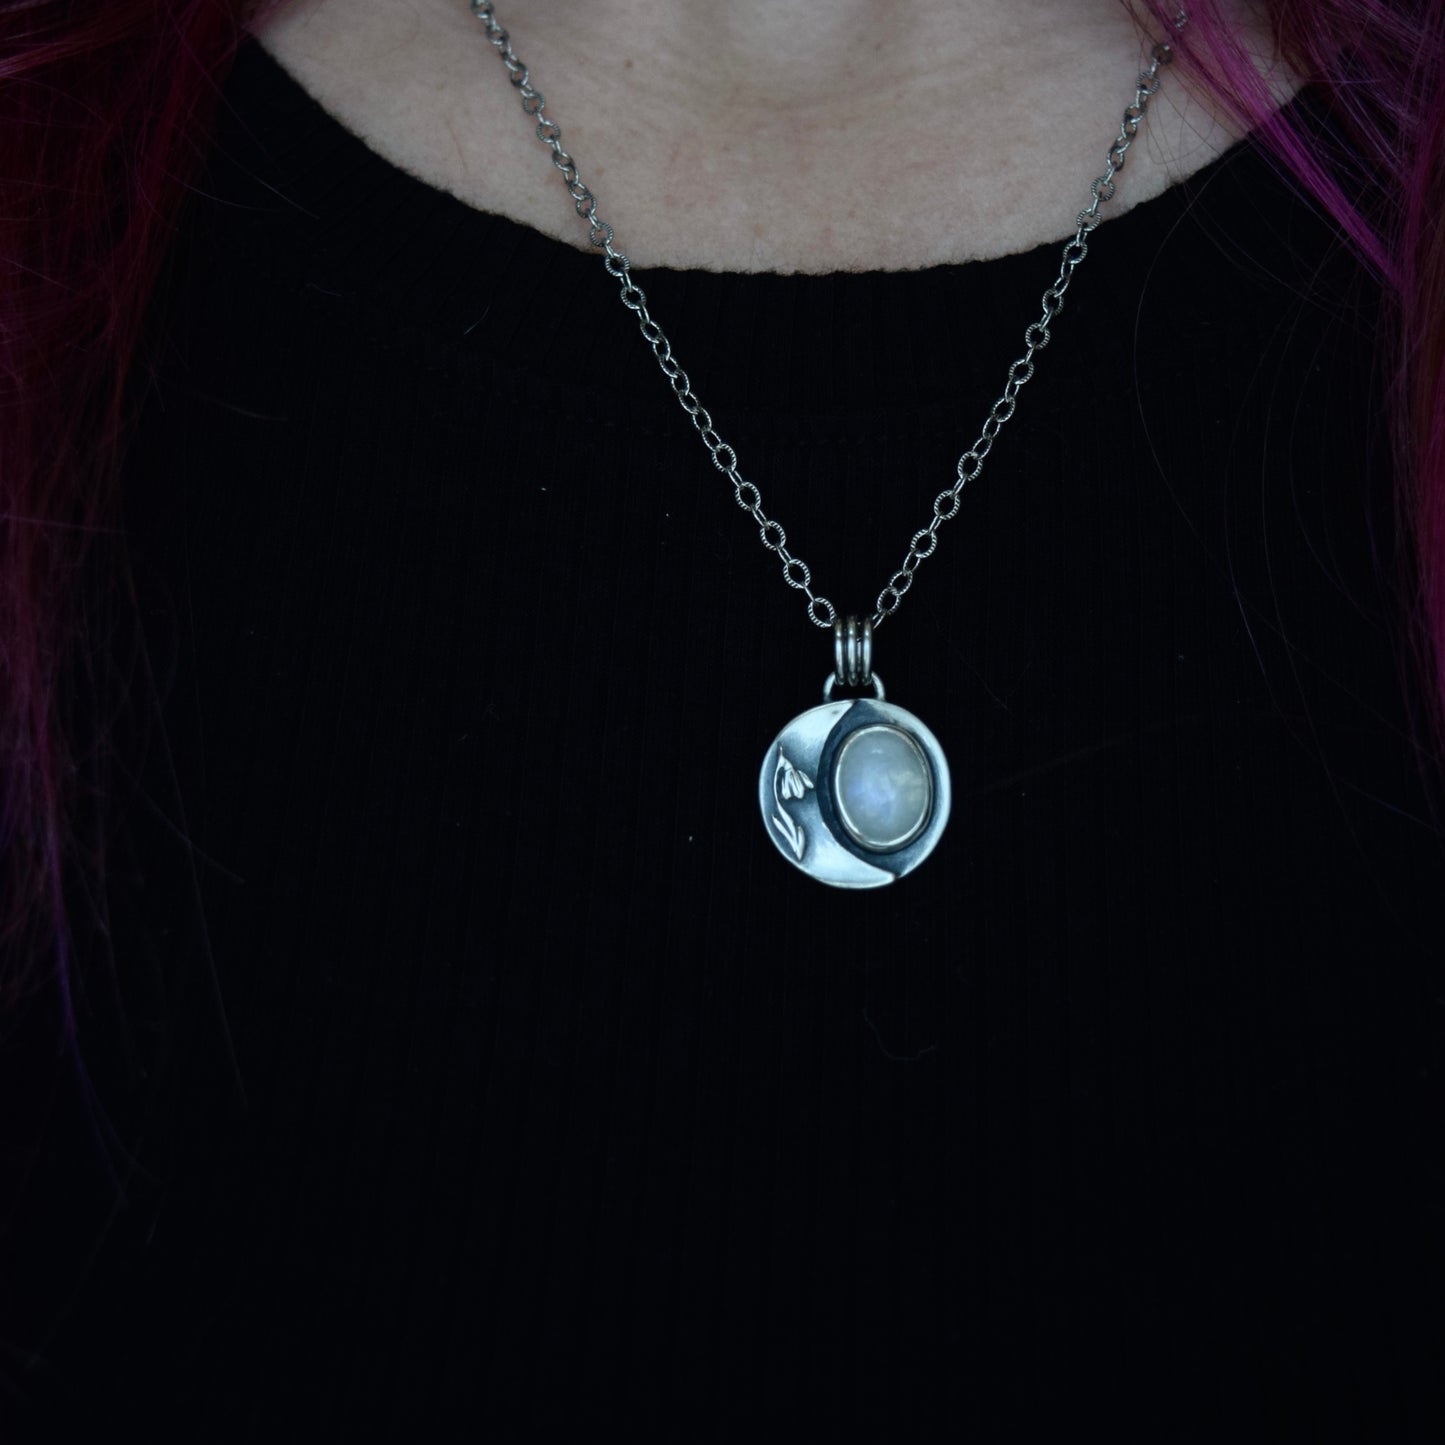 Double Sided Snowdrop Lunar Phase Pendant with Rainbow Moonstone